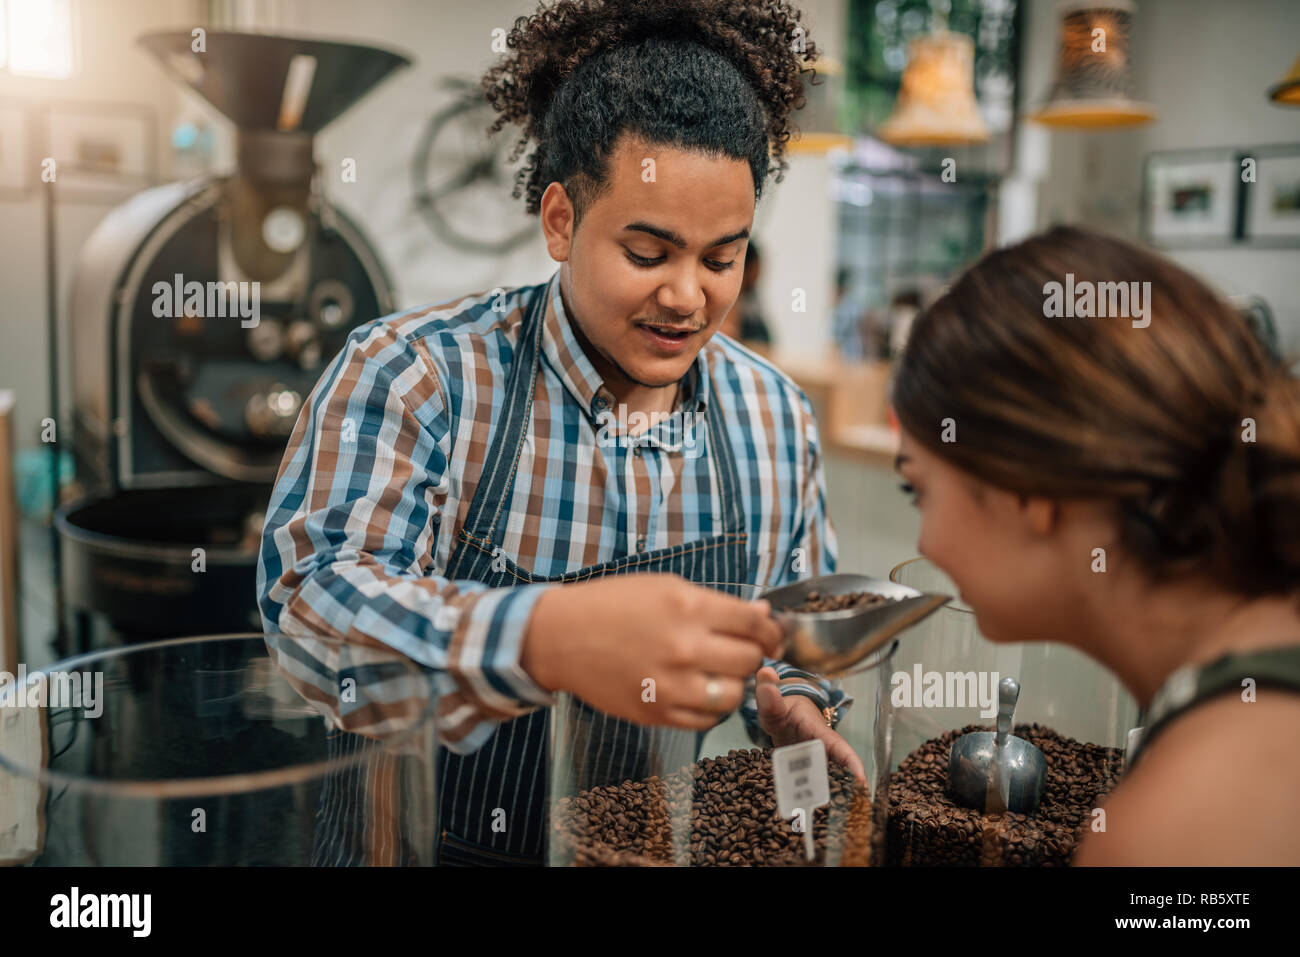 Bean roasting connoisseur allowing customer to smell the aroma from the coffee beans Stock Photo